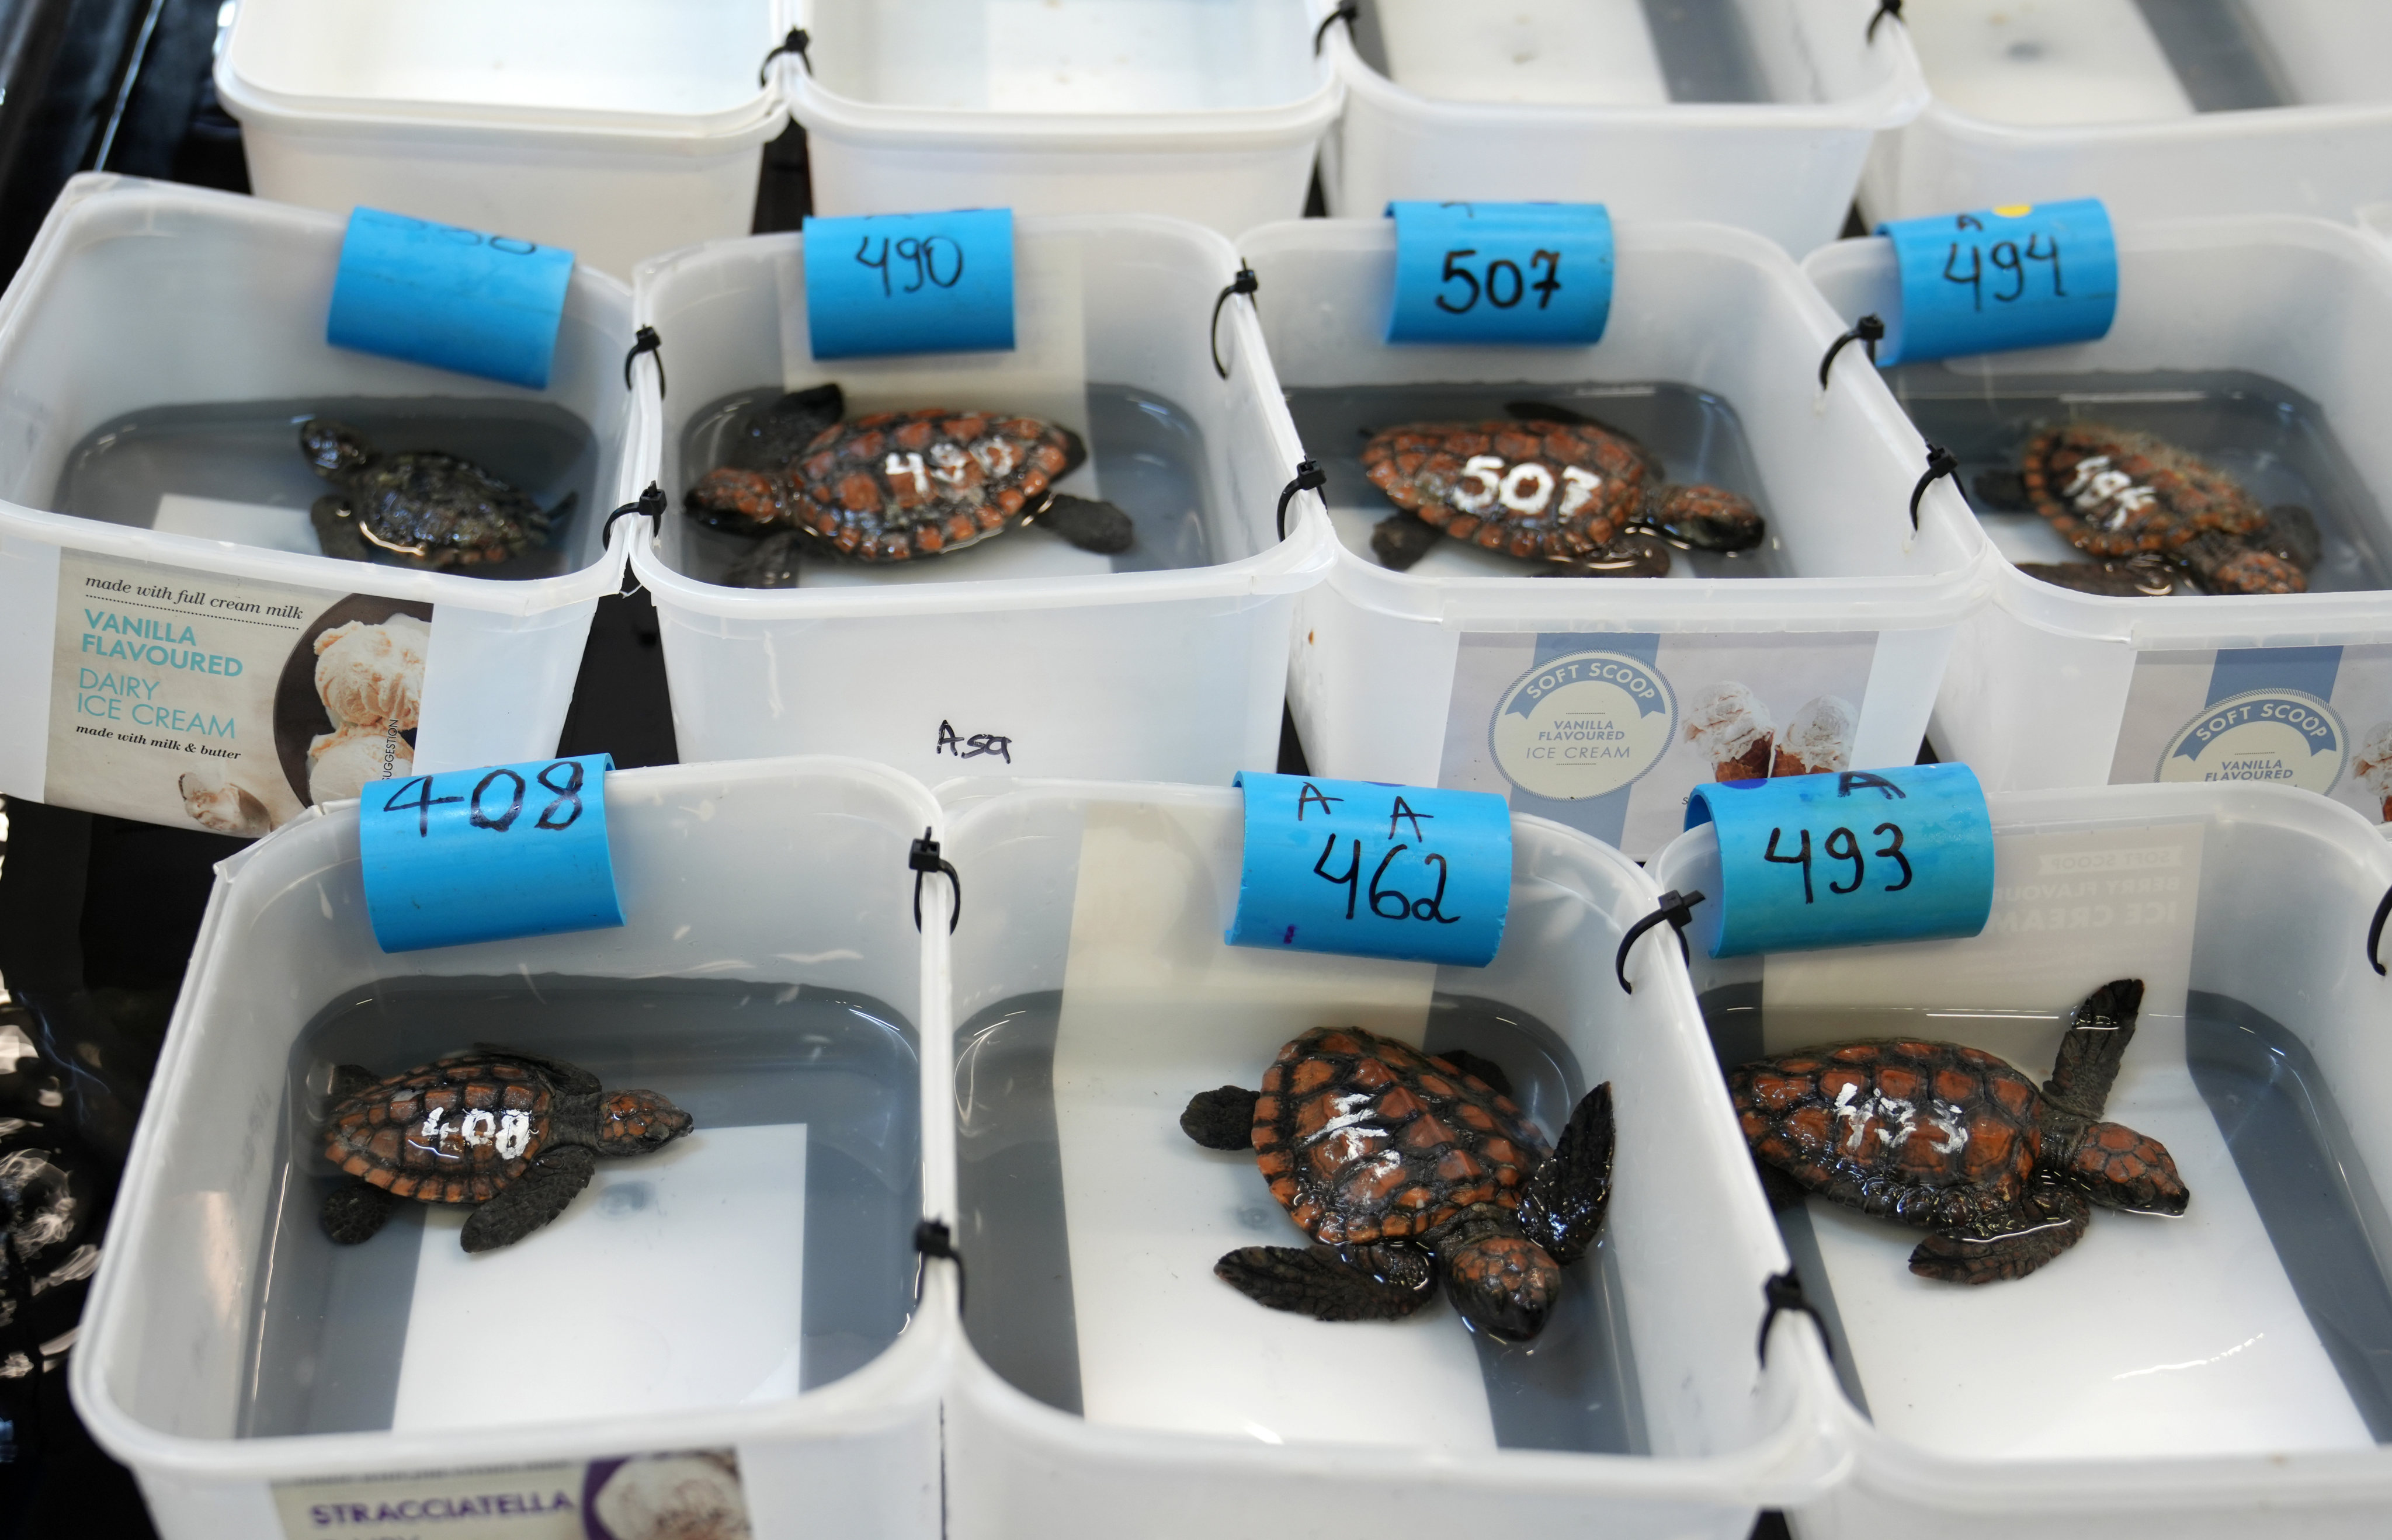 Turtle hatchlings at the Turtle Conservation Centre at the Two Oceans Aquarium in Cape Town. Photo: AP